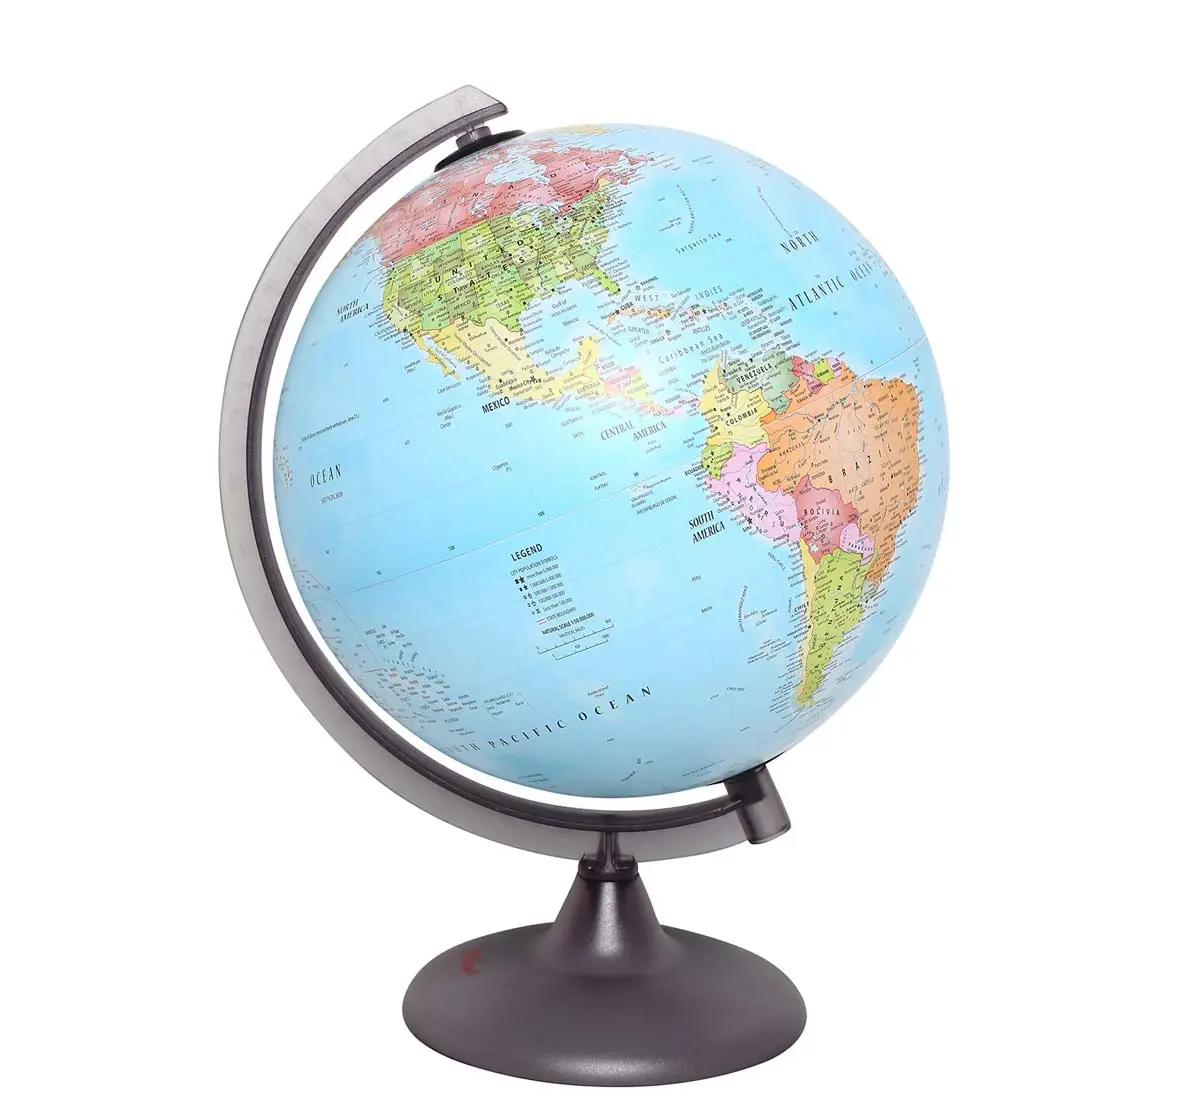 Globes Hamleys Spinning Globe 25 cms Science Equipments for Kids age 5Y+ 